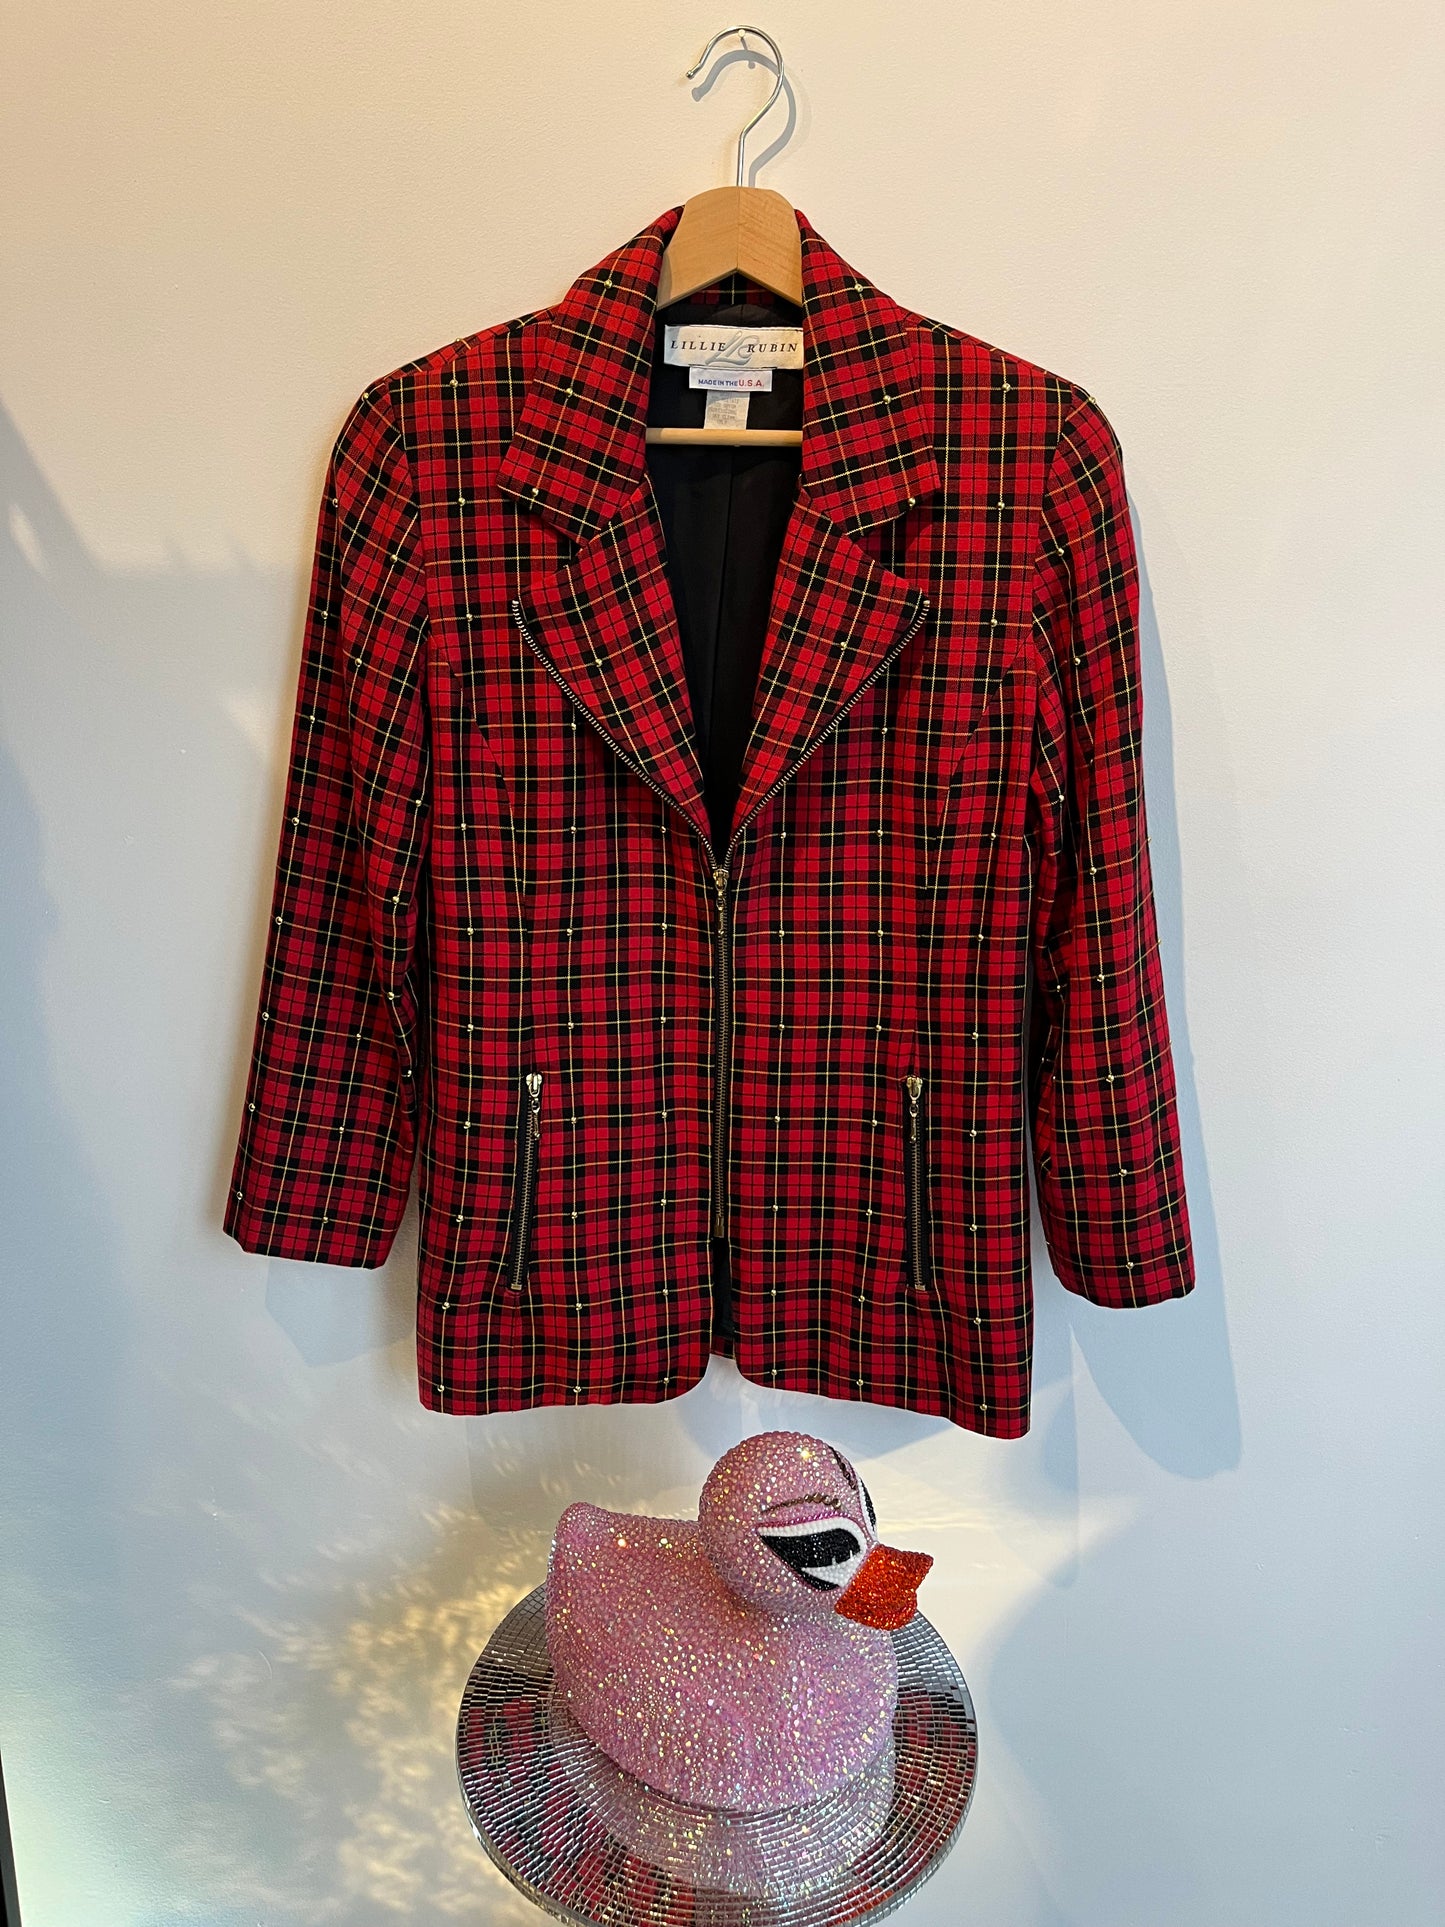 Red Tartan Plaid Women's Jacket with Gold Studs